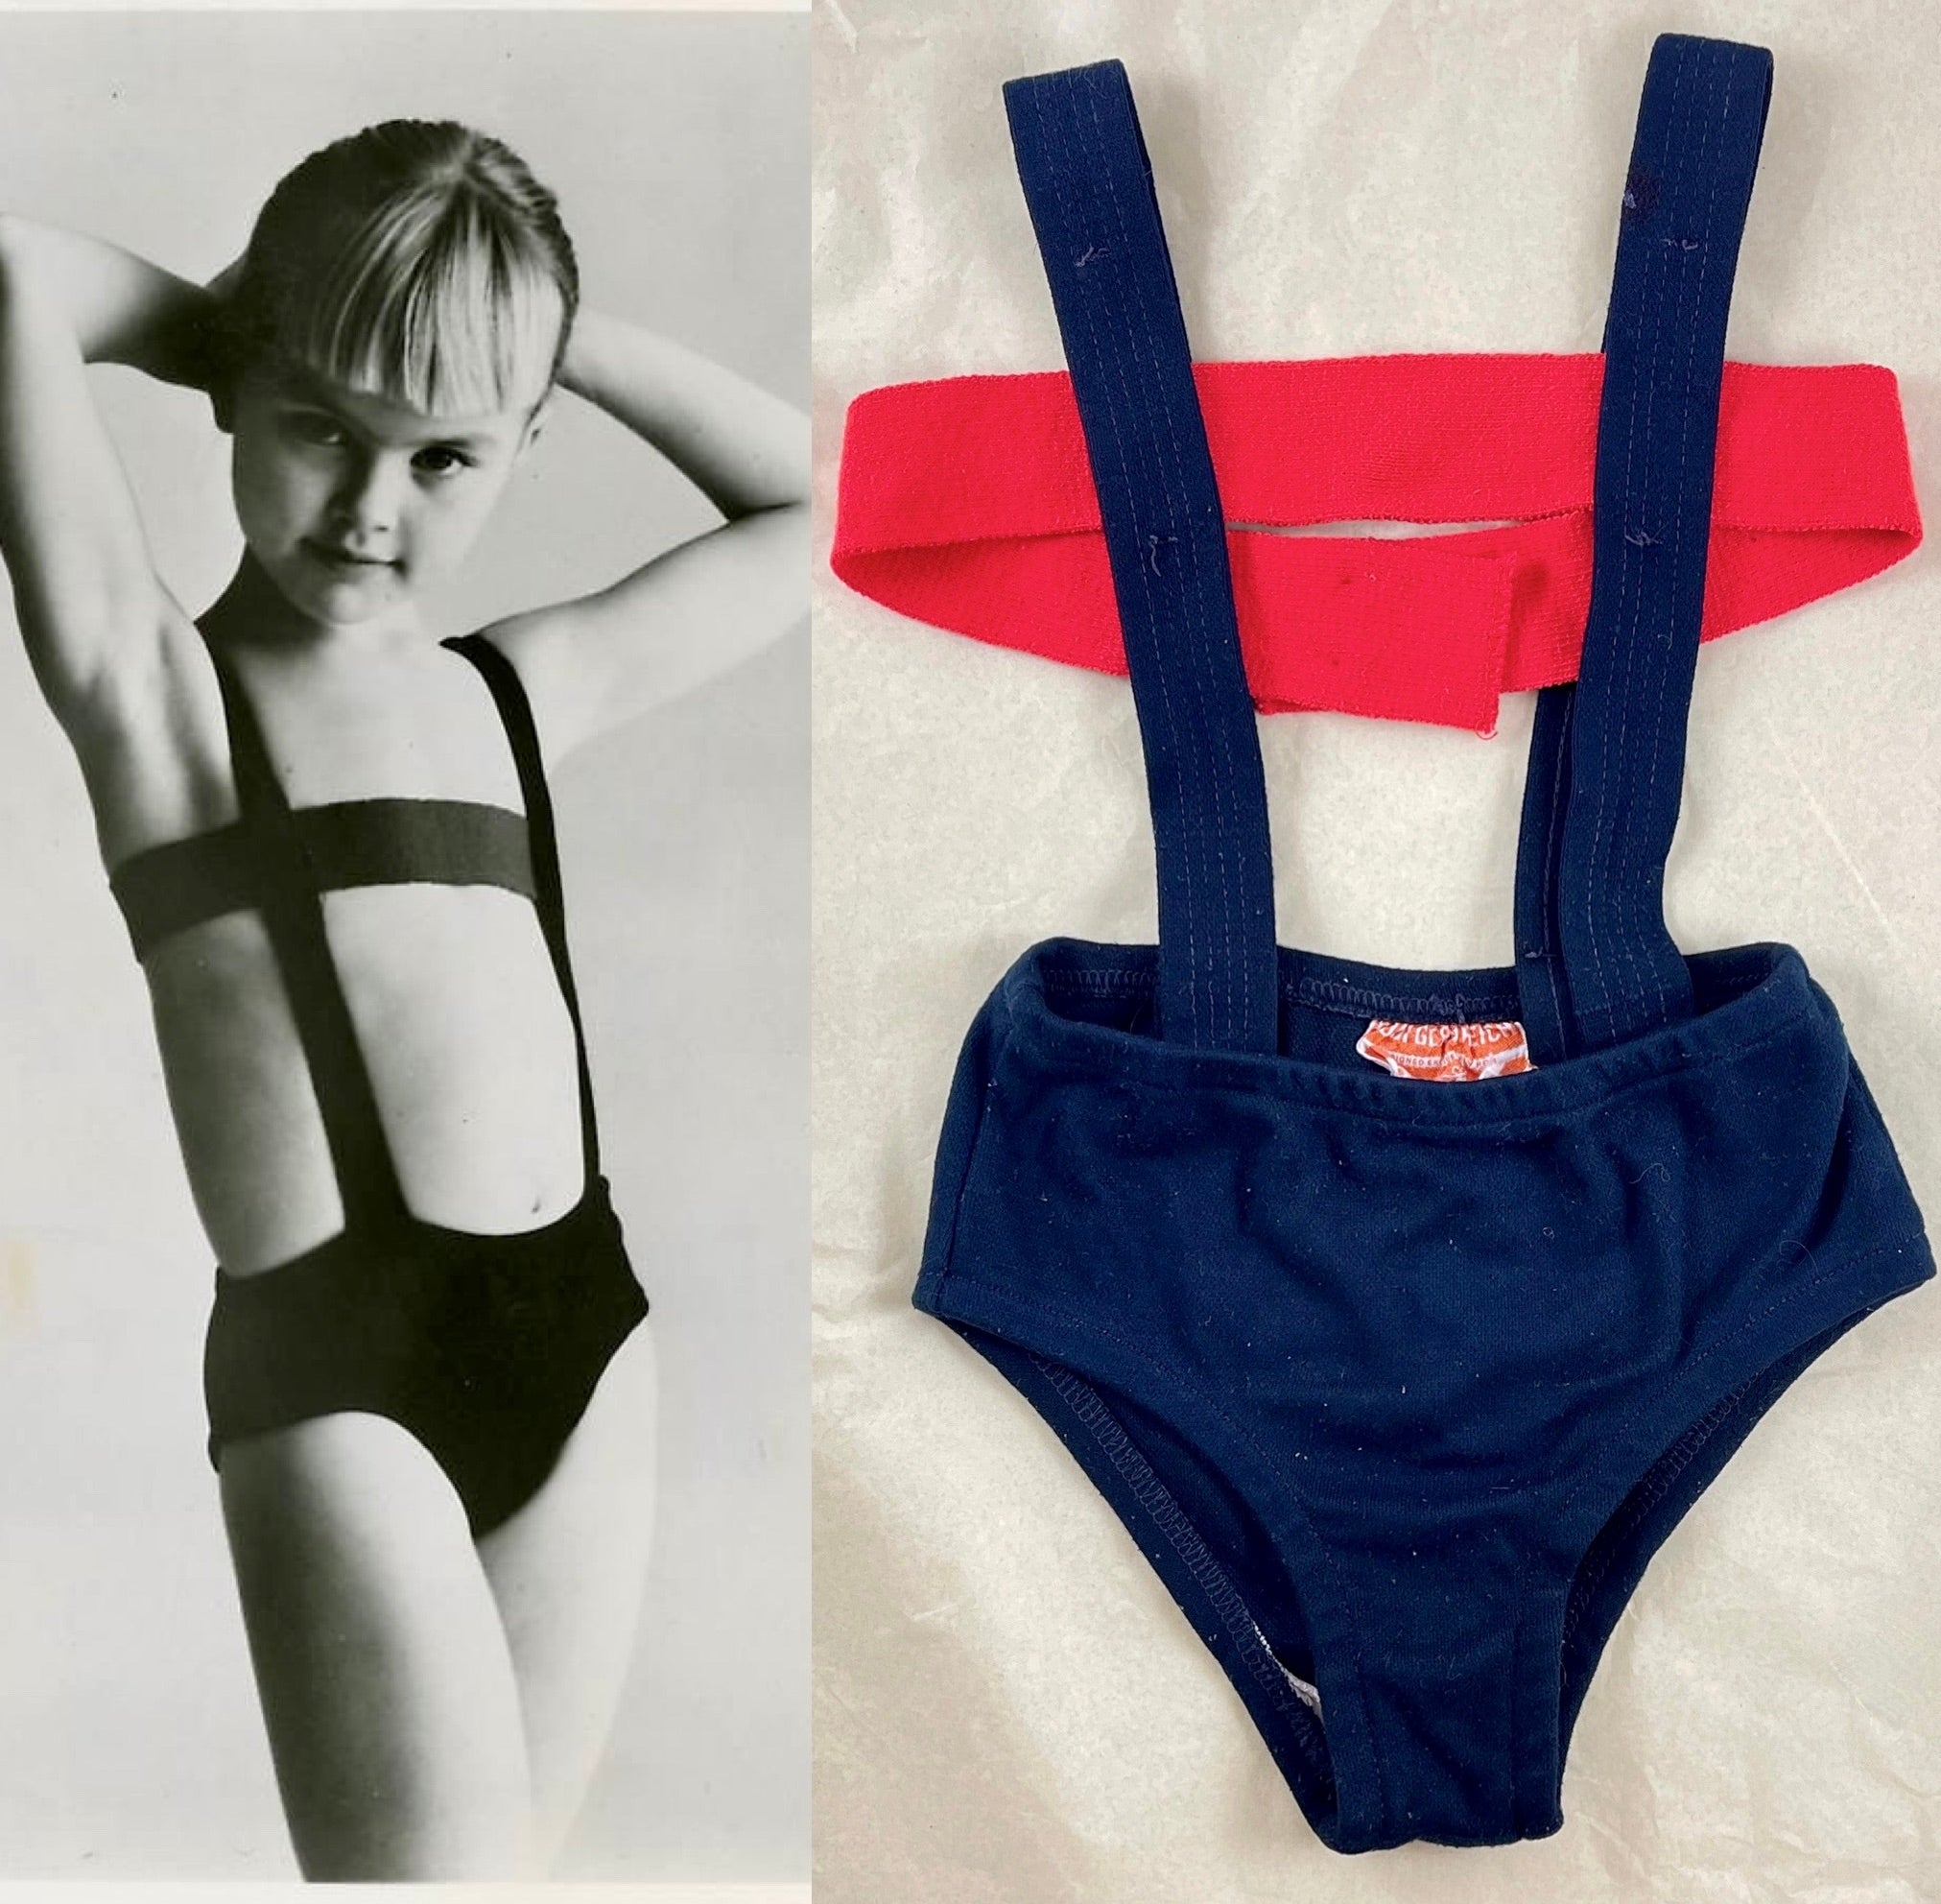 An original girls sized 6X monokini with a bandeau top bathing suit designed by Rudi Gernreich, circa 1964. 

Rudi Gernreich was an American Designer born in Austria, Vienna in 1922 and died in Los Angeles in 1985.

Gernreich's topless bathing suit